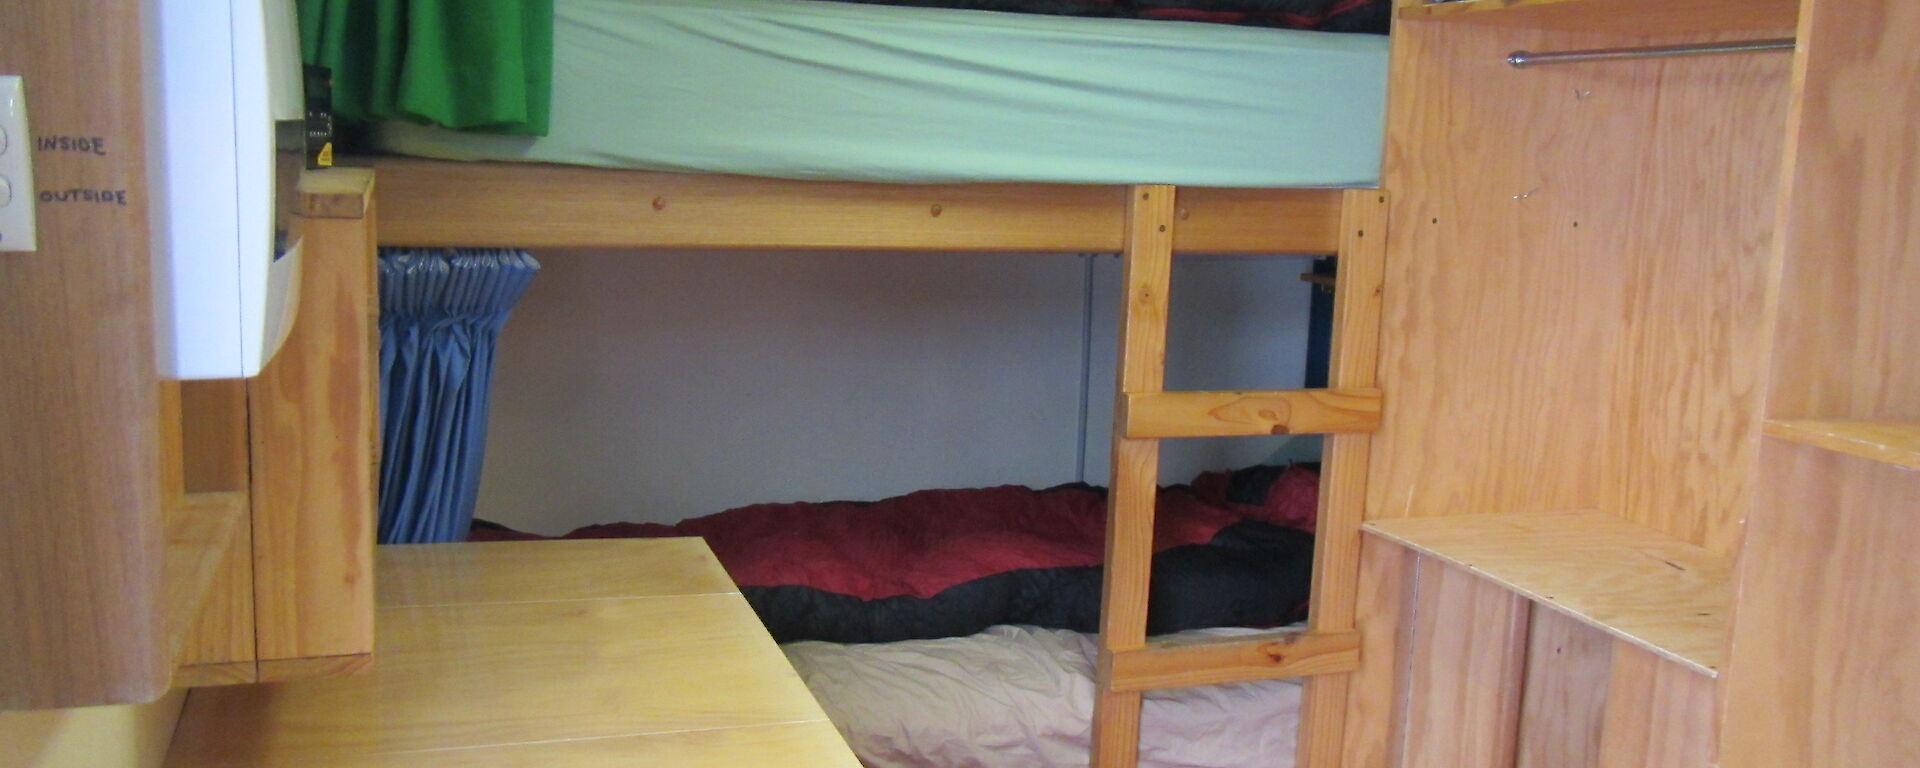 A small tight room with a bunk bed